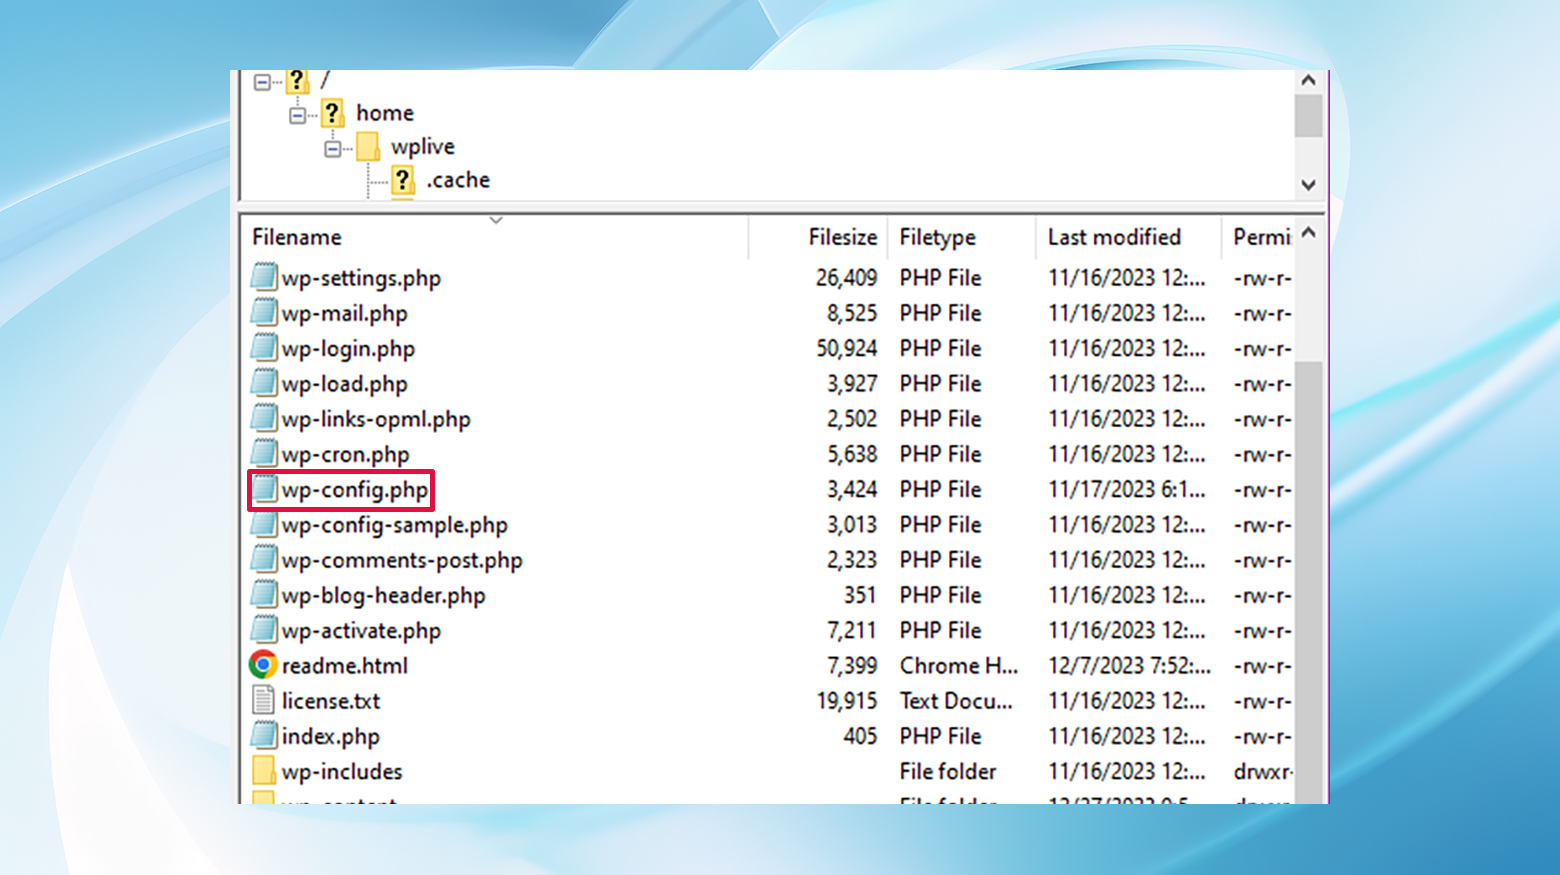 The wp-config.php file is displayed in an FTP client alongside the other WordPress files and folders.